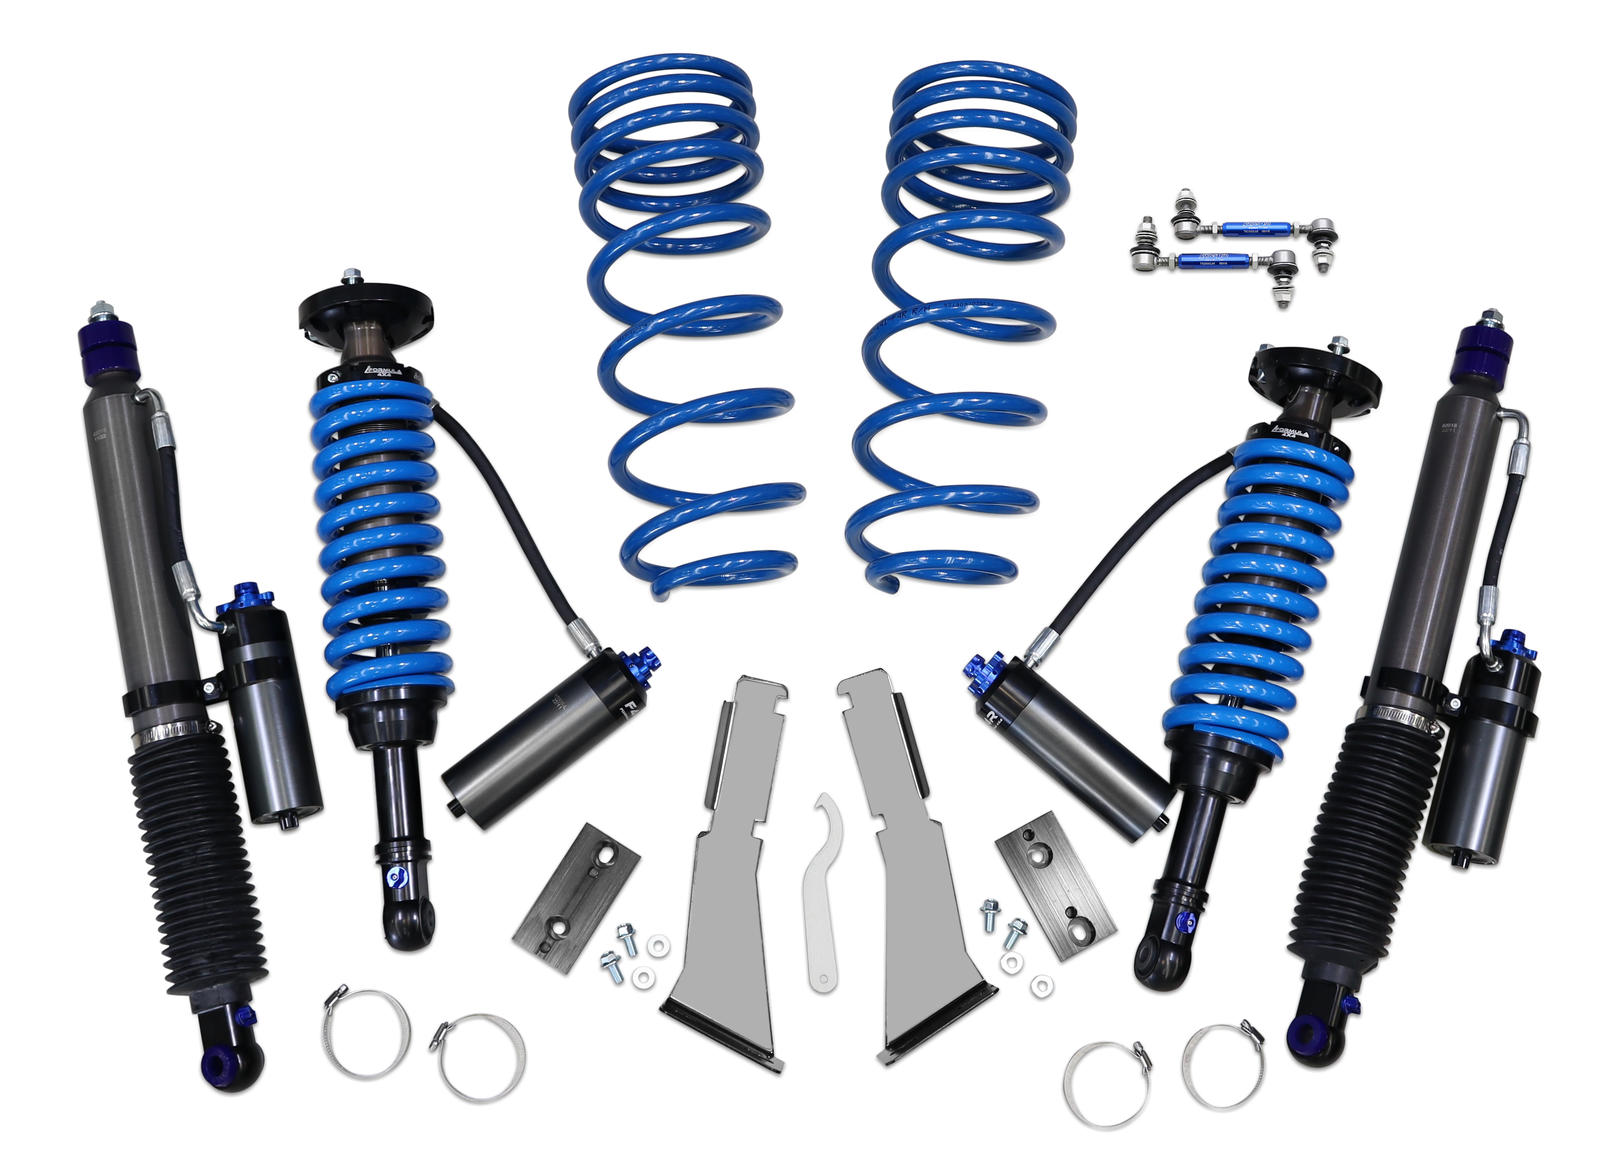 2-3 Inch Adjustable F4R Formula 4x4 Lift Kit to suit Toyota Land Cruiser 300 Series 2021-on